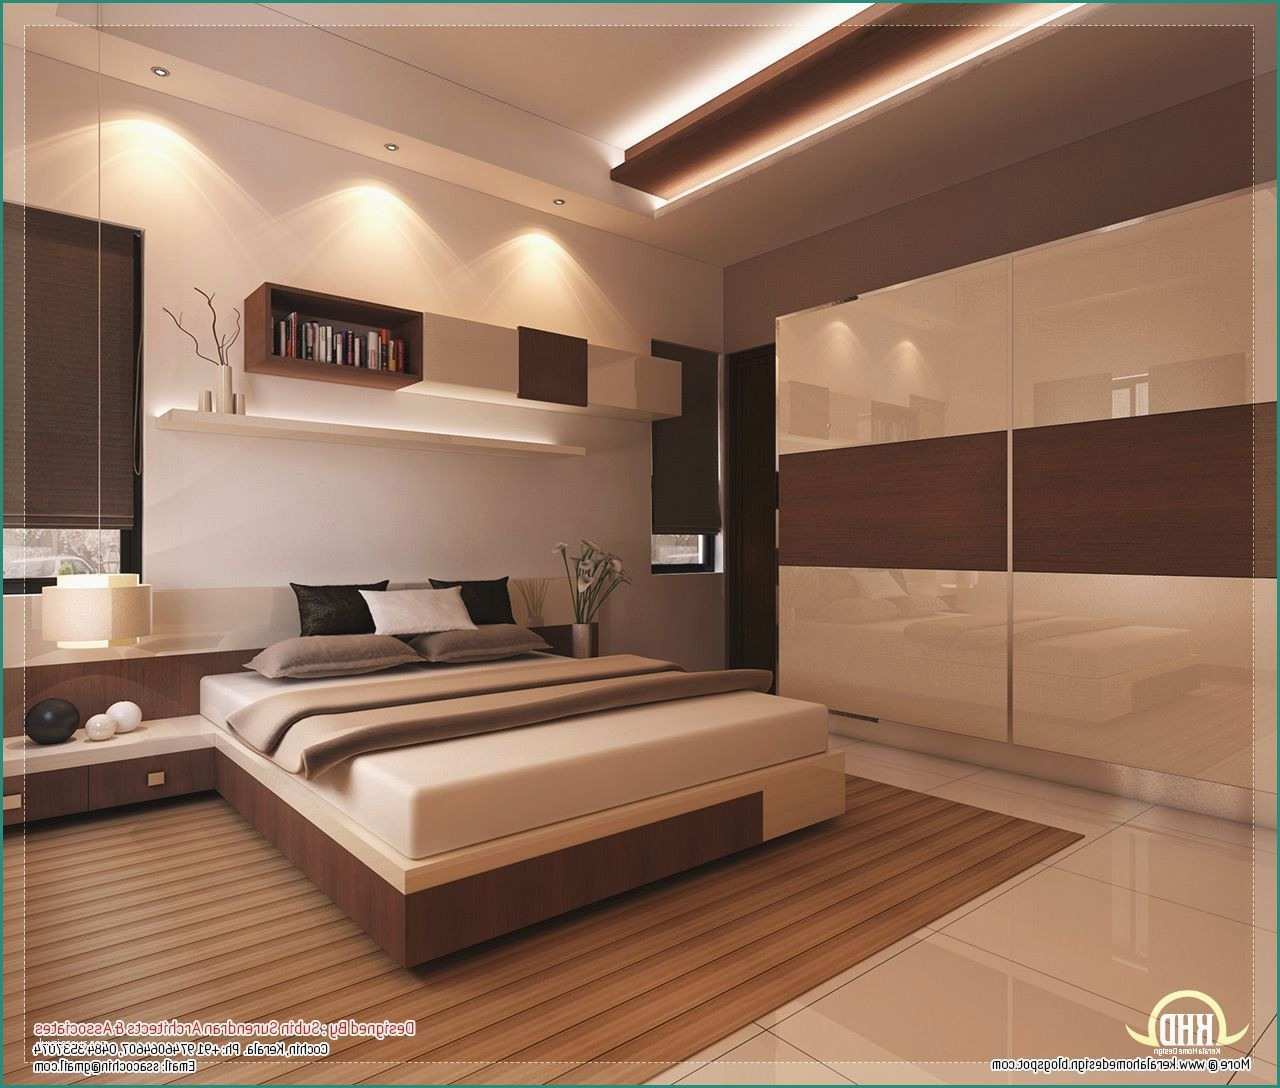 Poltrone Design Low Cost E Bedroom Designs India Low Cost More Picture Bedroom